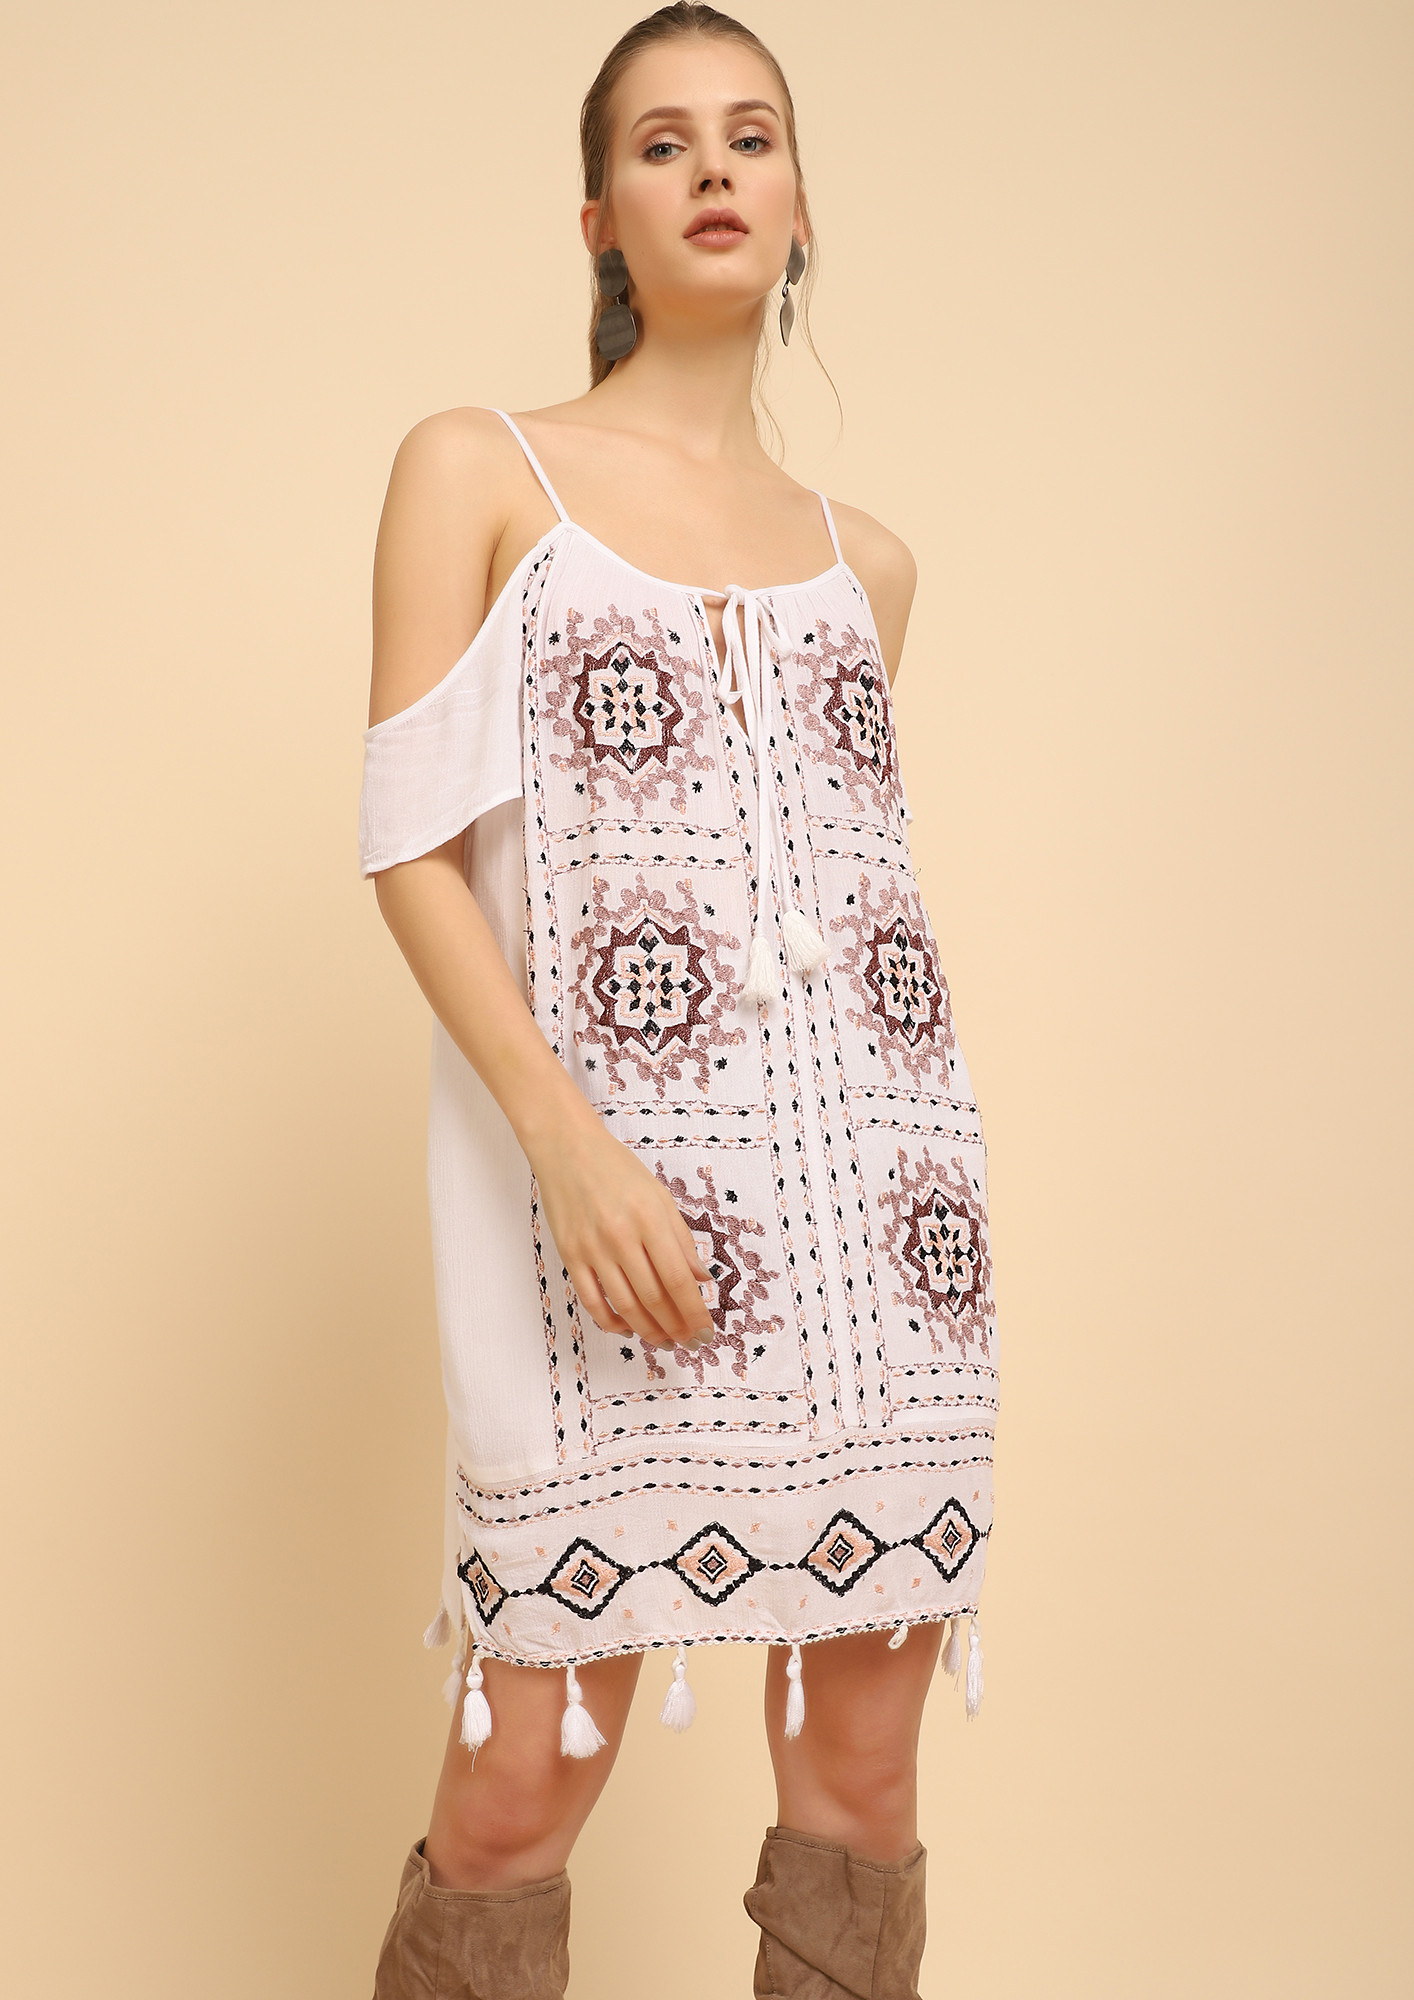 BLOCK AND BLOCK FOR YOU WHITE SHIFT DRESS